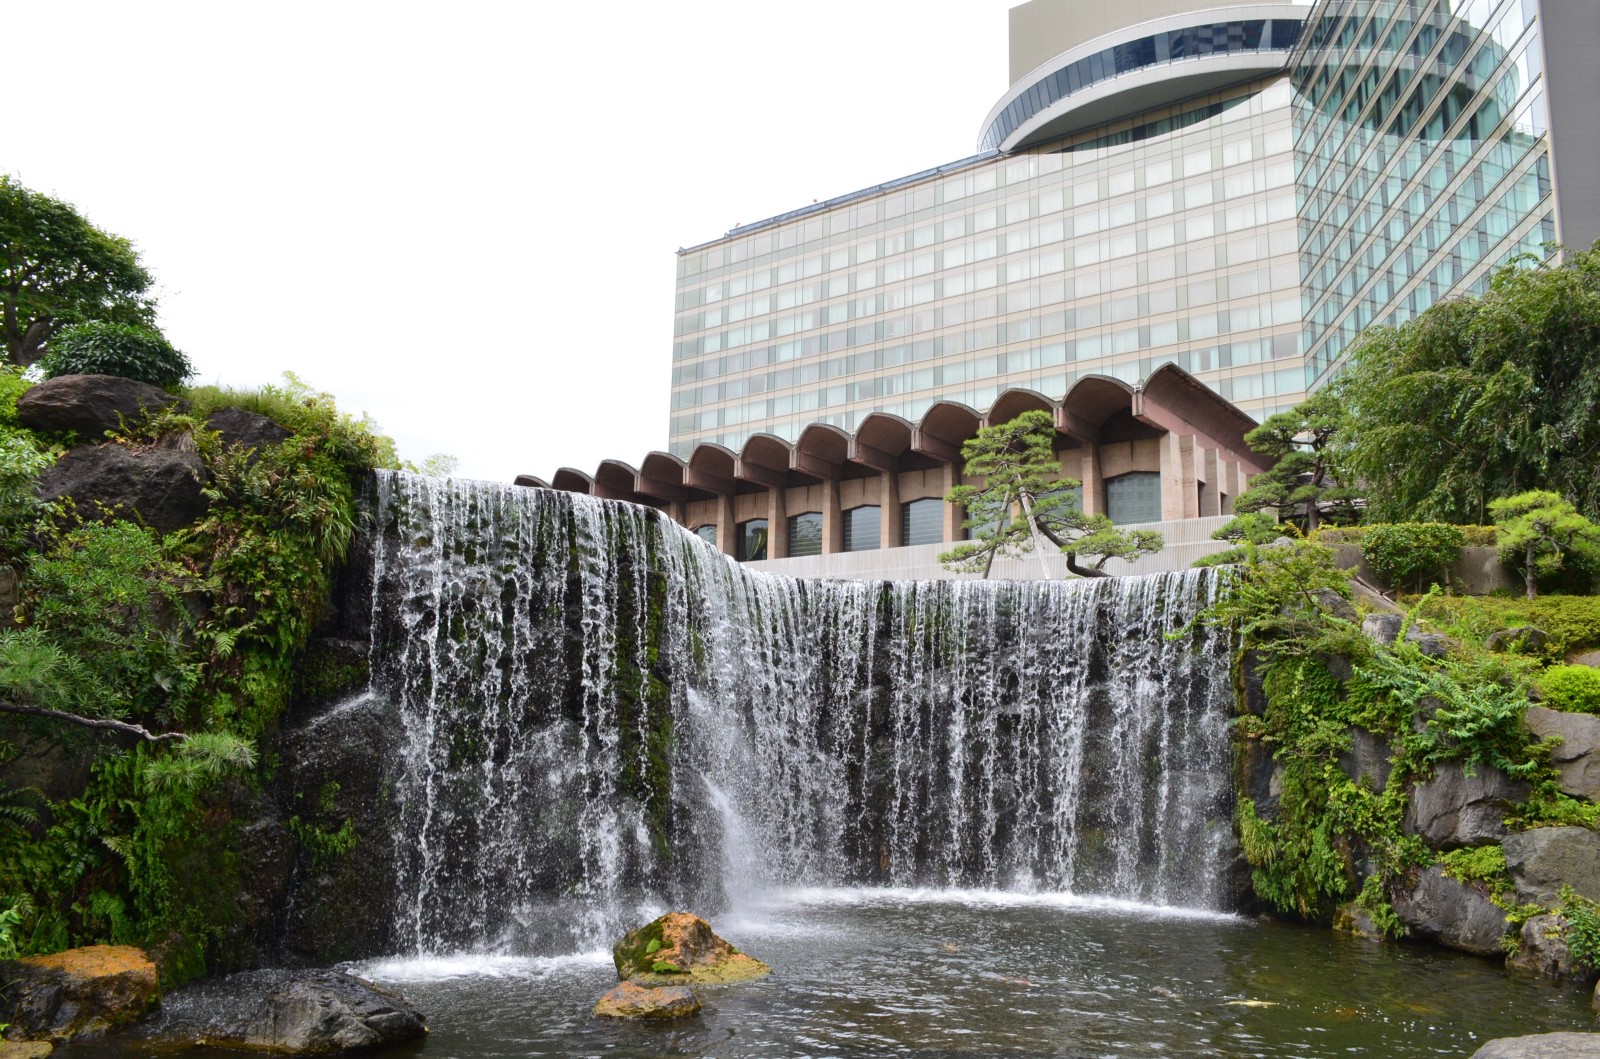 Water fall at the Japanese Garden in Hotel New Otani Tokyo